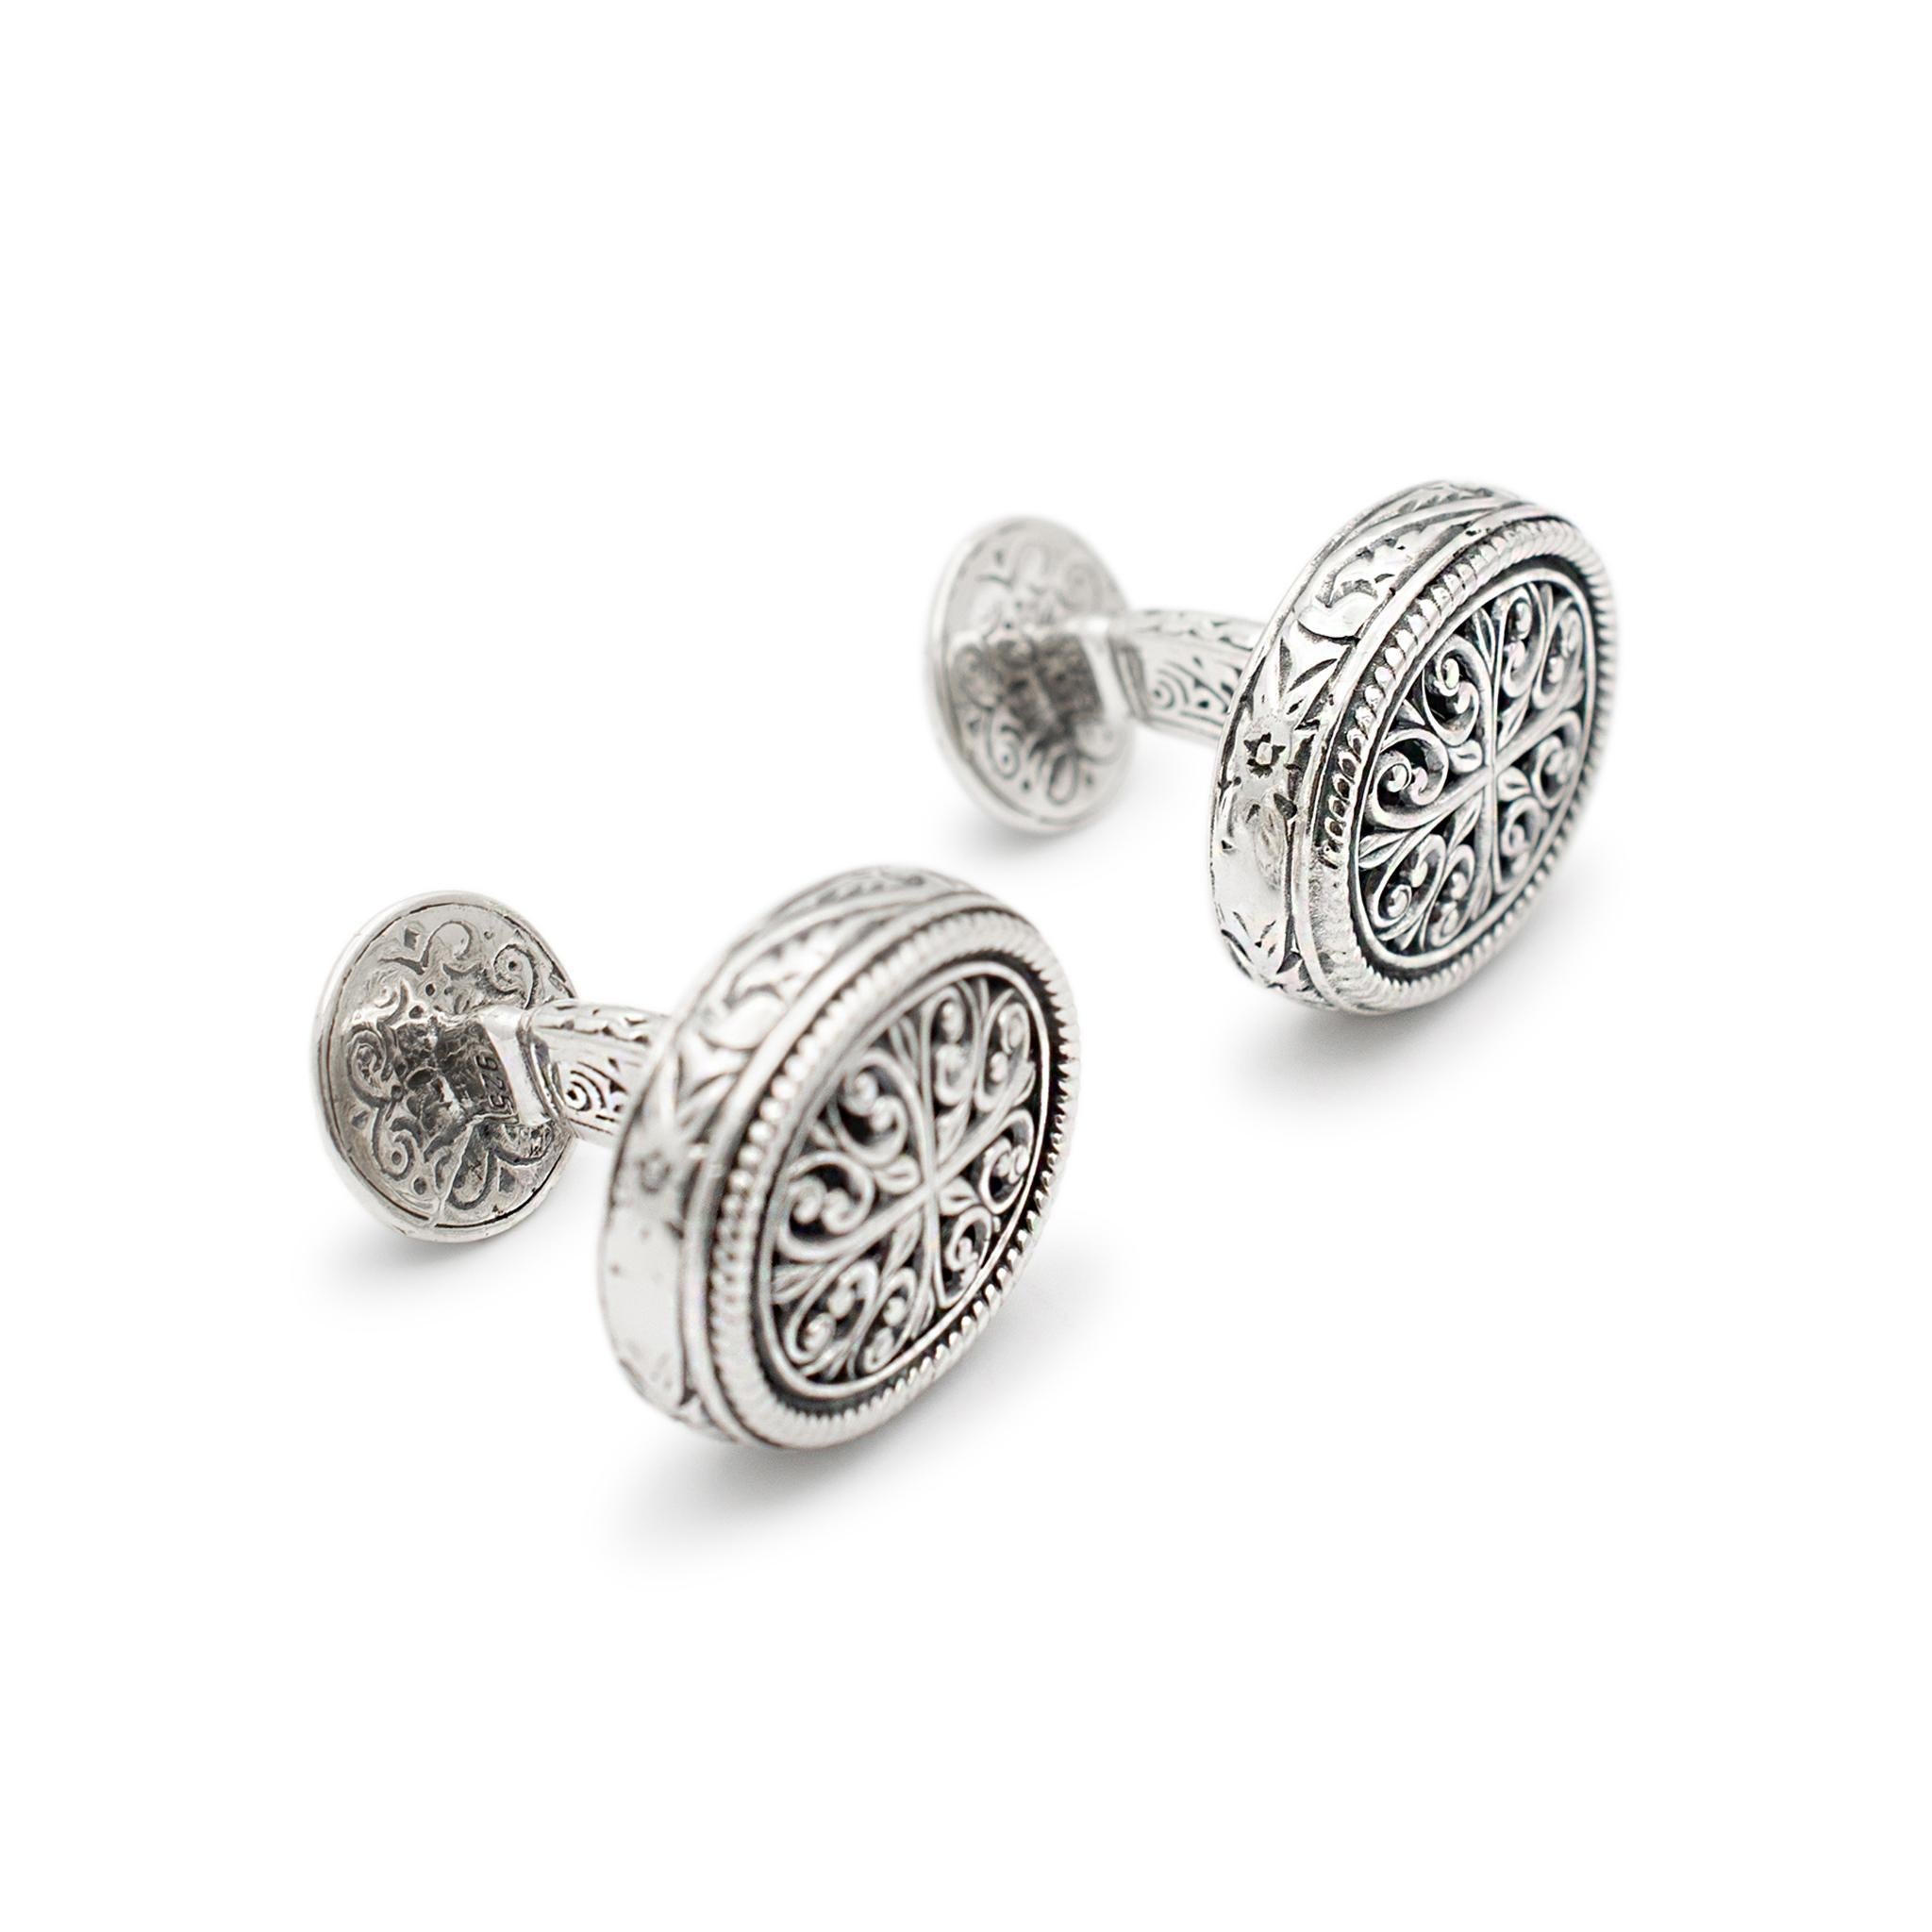 Brand: Konstantino
Gender: Mens
Metal Type: 925 Sterling Silver
Width : 16.34 mm
Length: 18.24 mm
Weight: 3.50 grams

One pair of man's designer made silver cufflinks. The metal was tested and determined to be 925 (STERLING) silver. Engraved with